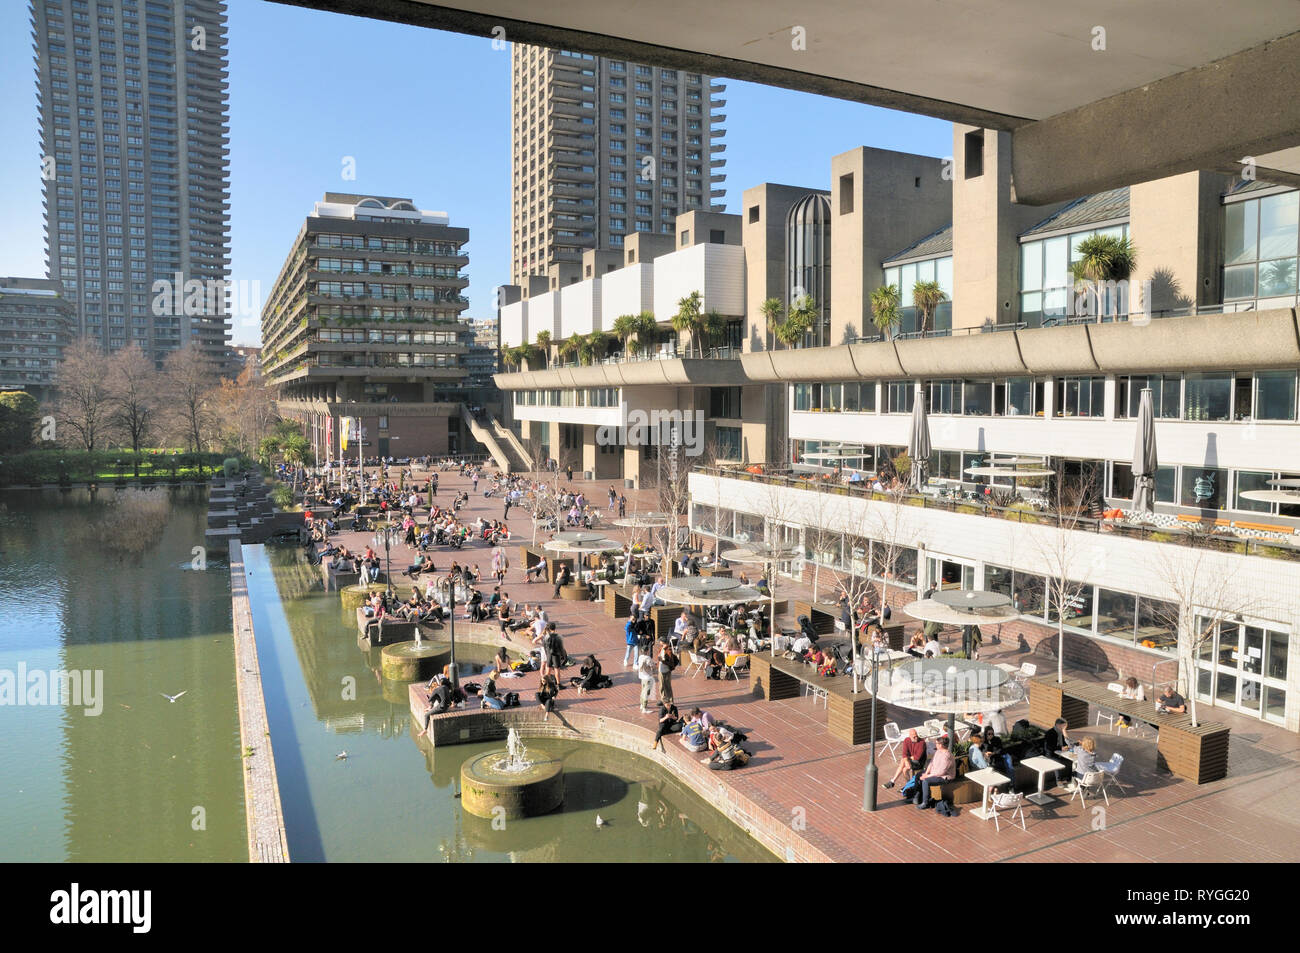 The Barbican Centre and Lakeside Terrace on the Barbican Estate, Silk Street, City of London, England, UK Stock Photo